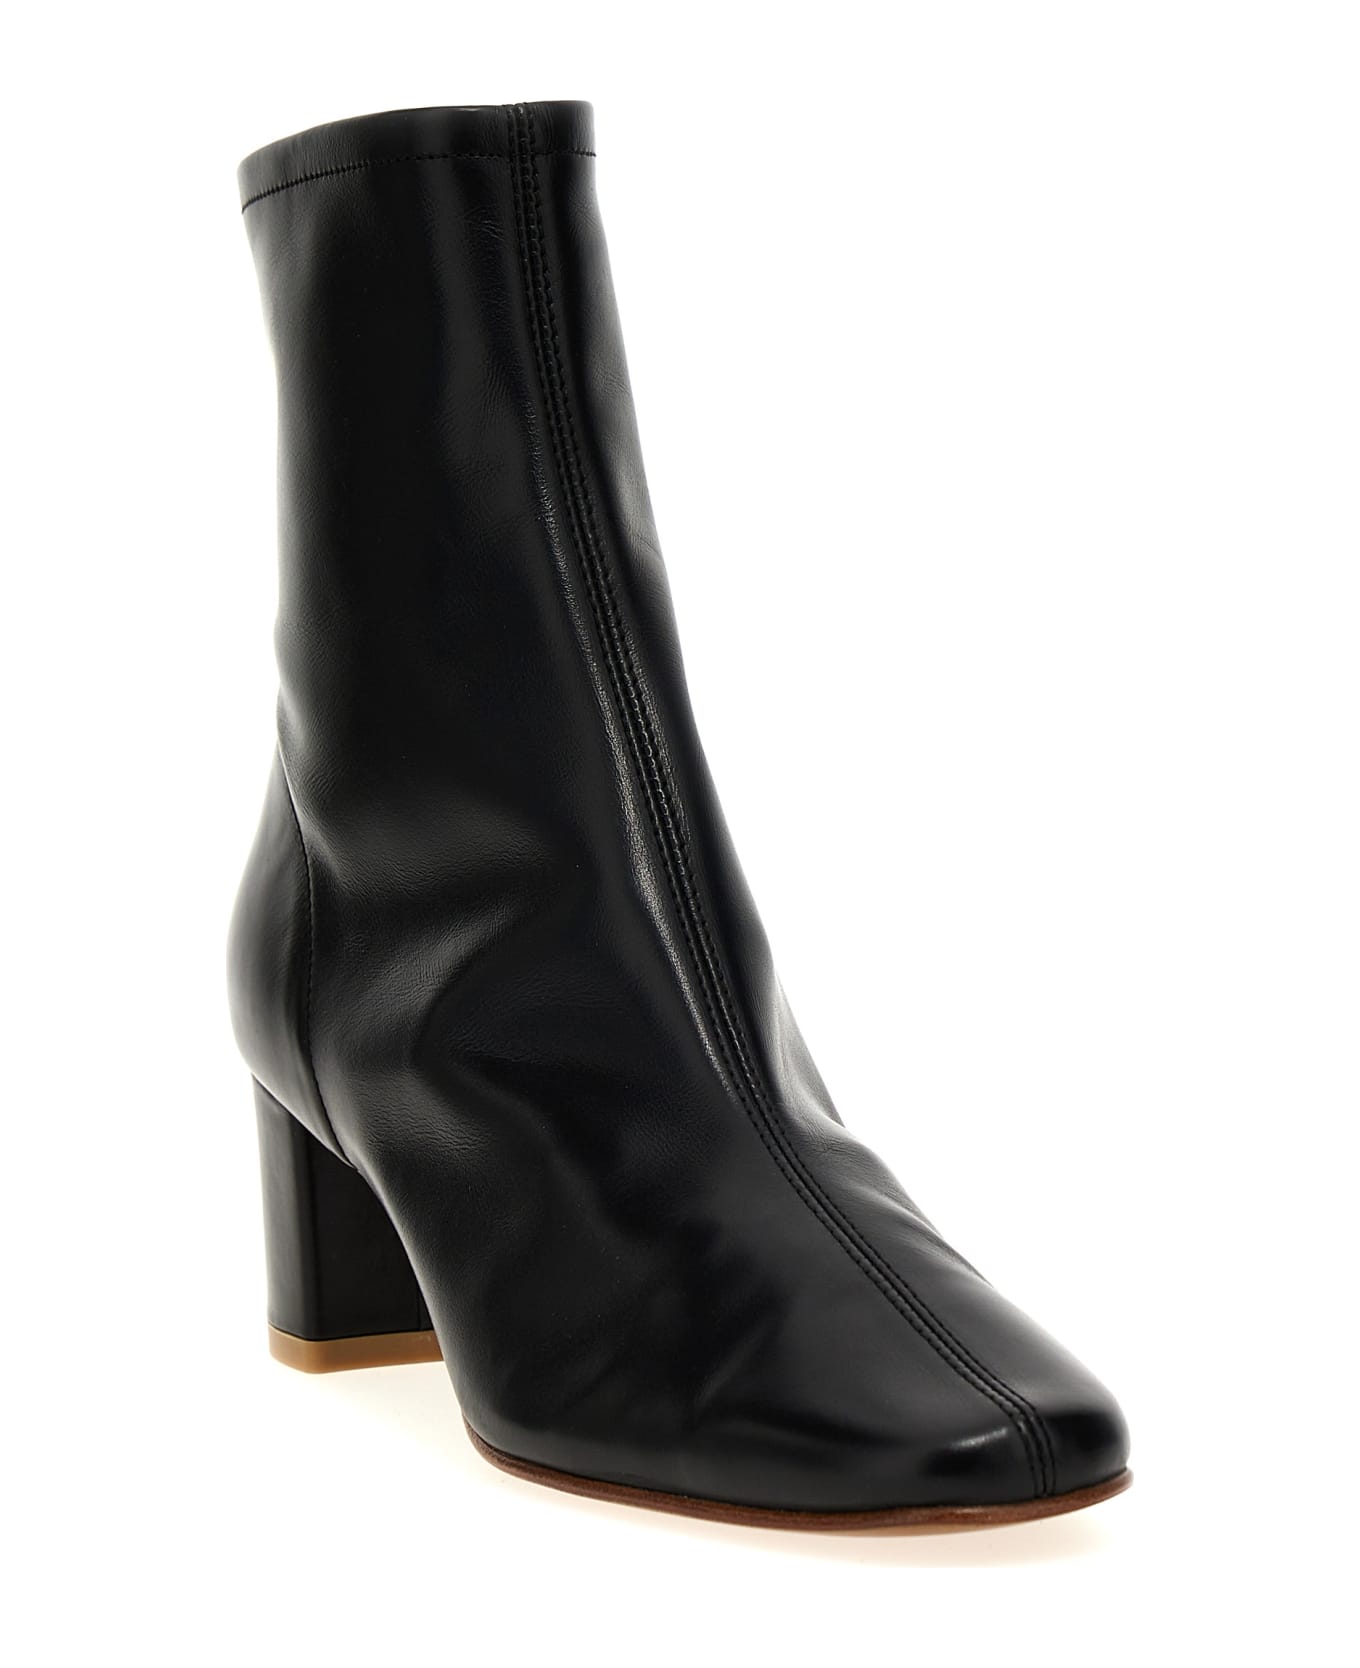 BY FAR 'sofia' Ankle Boots - Black  